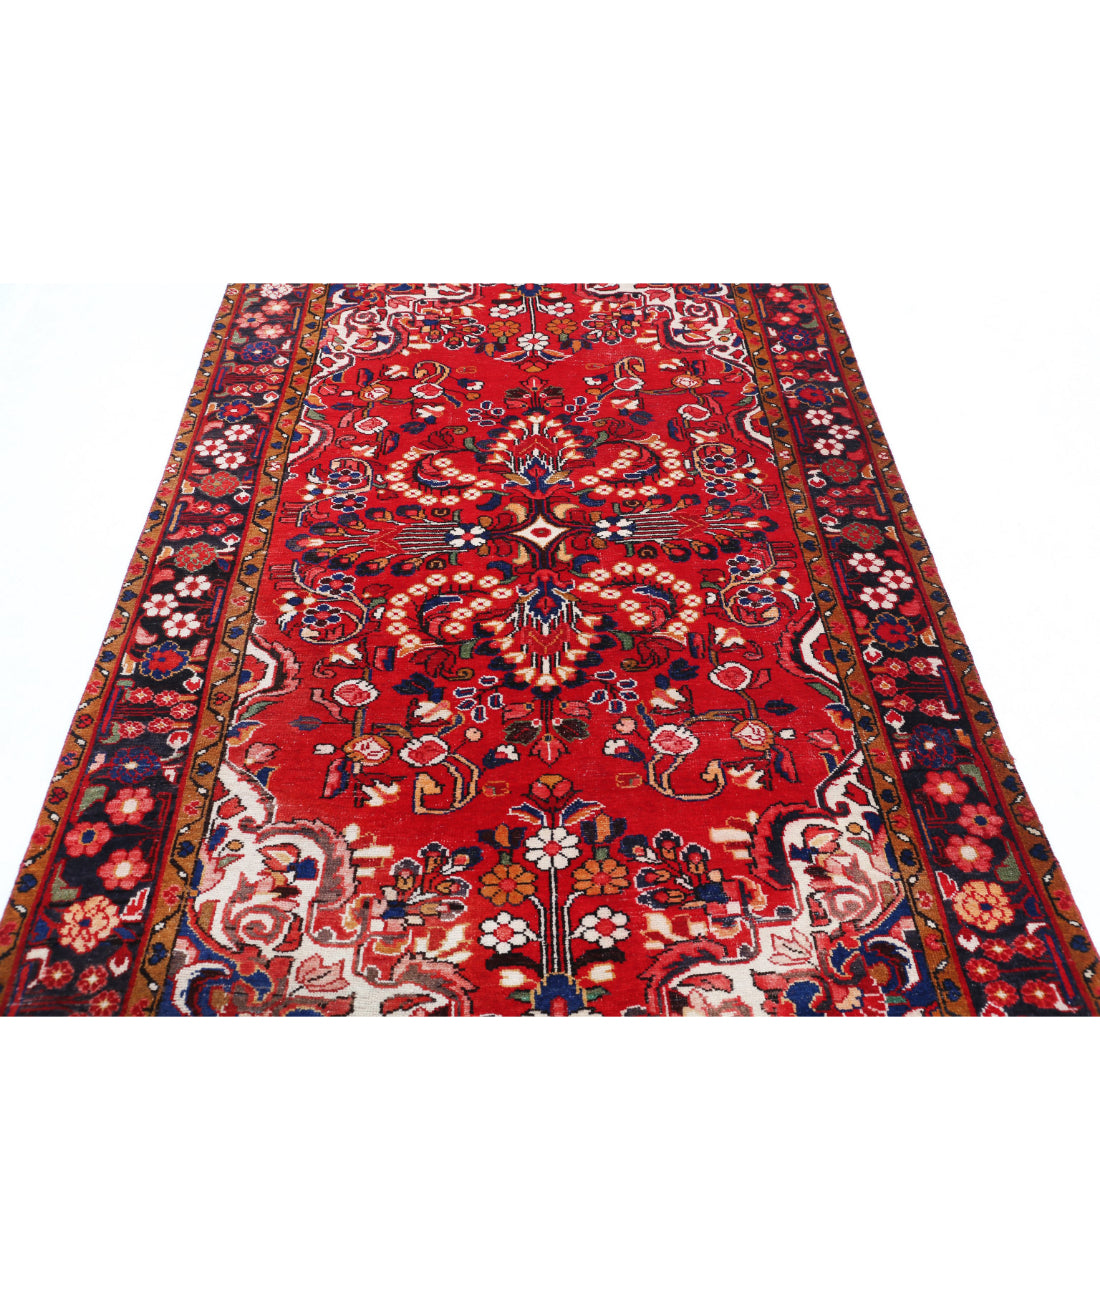 Hand Knotted Persian Hamadan Wool Rug - 4'9'' x 7'8'' 4'9'' x 7'8'' (143 X 230) / Red / Black